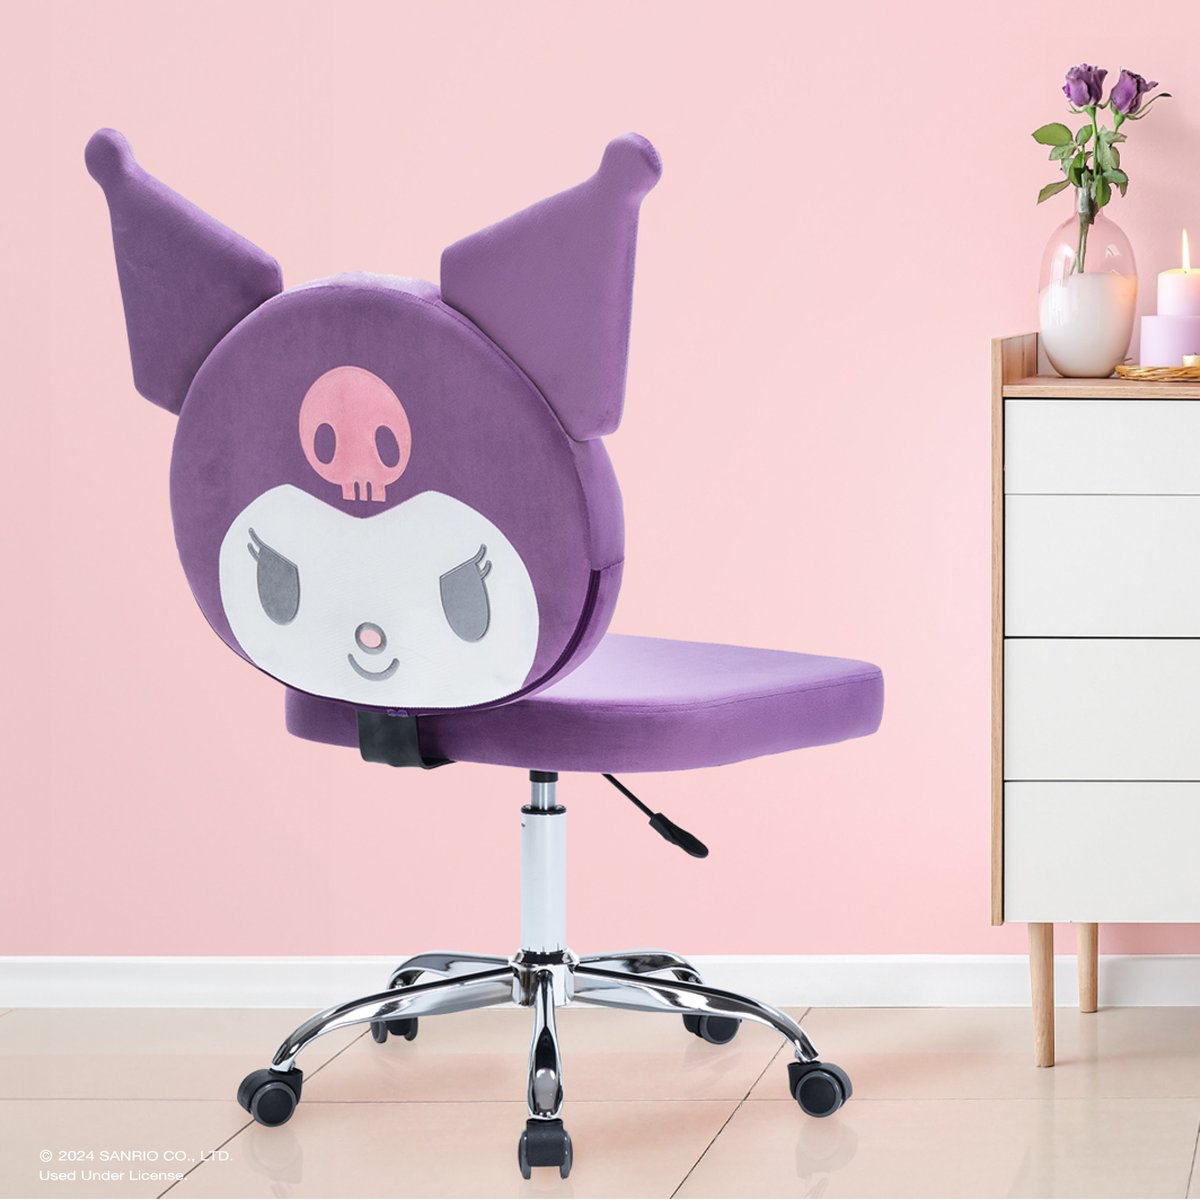 You can sit with us 💗✨ New adorable swivel chairs from @ImpressionsVanity are here! Shop now: bit.ly/4bn8MA2